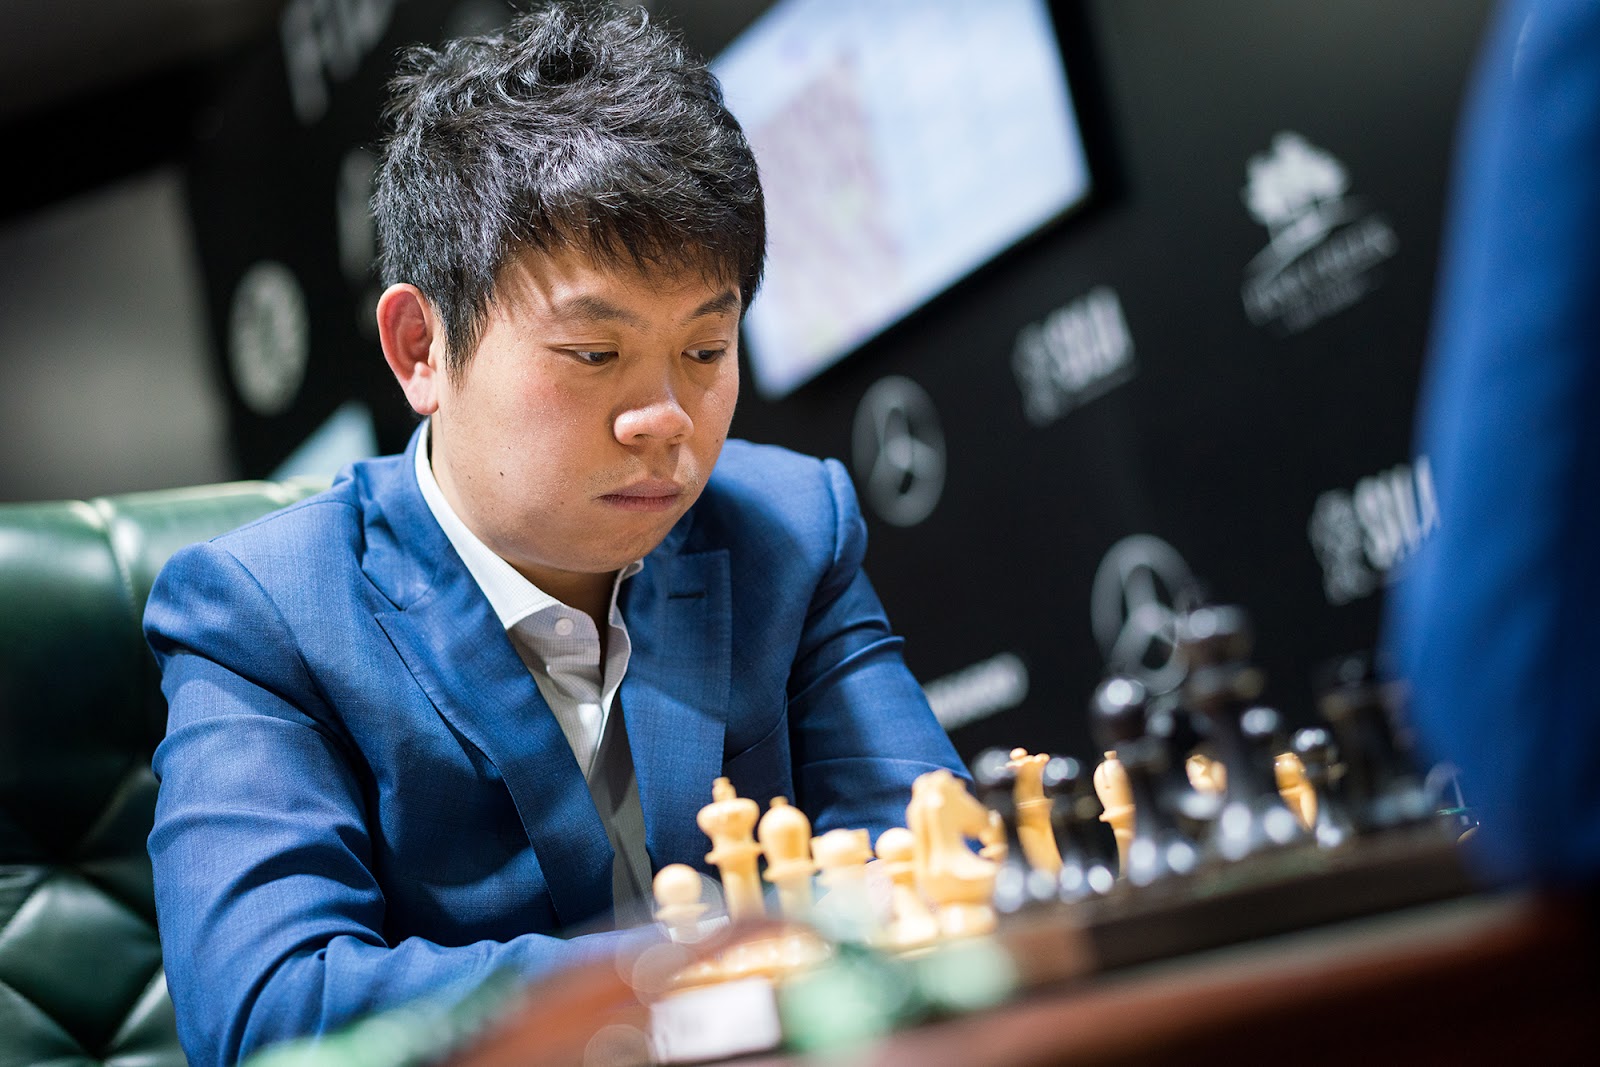 GM Wesley So made a quick draw against GM Ian Nepomniachtchi